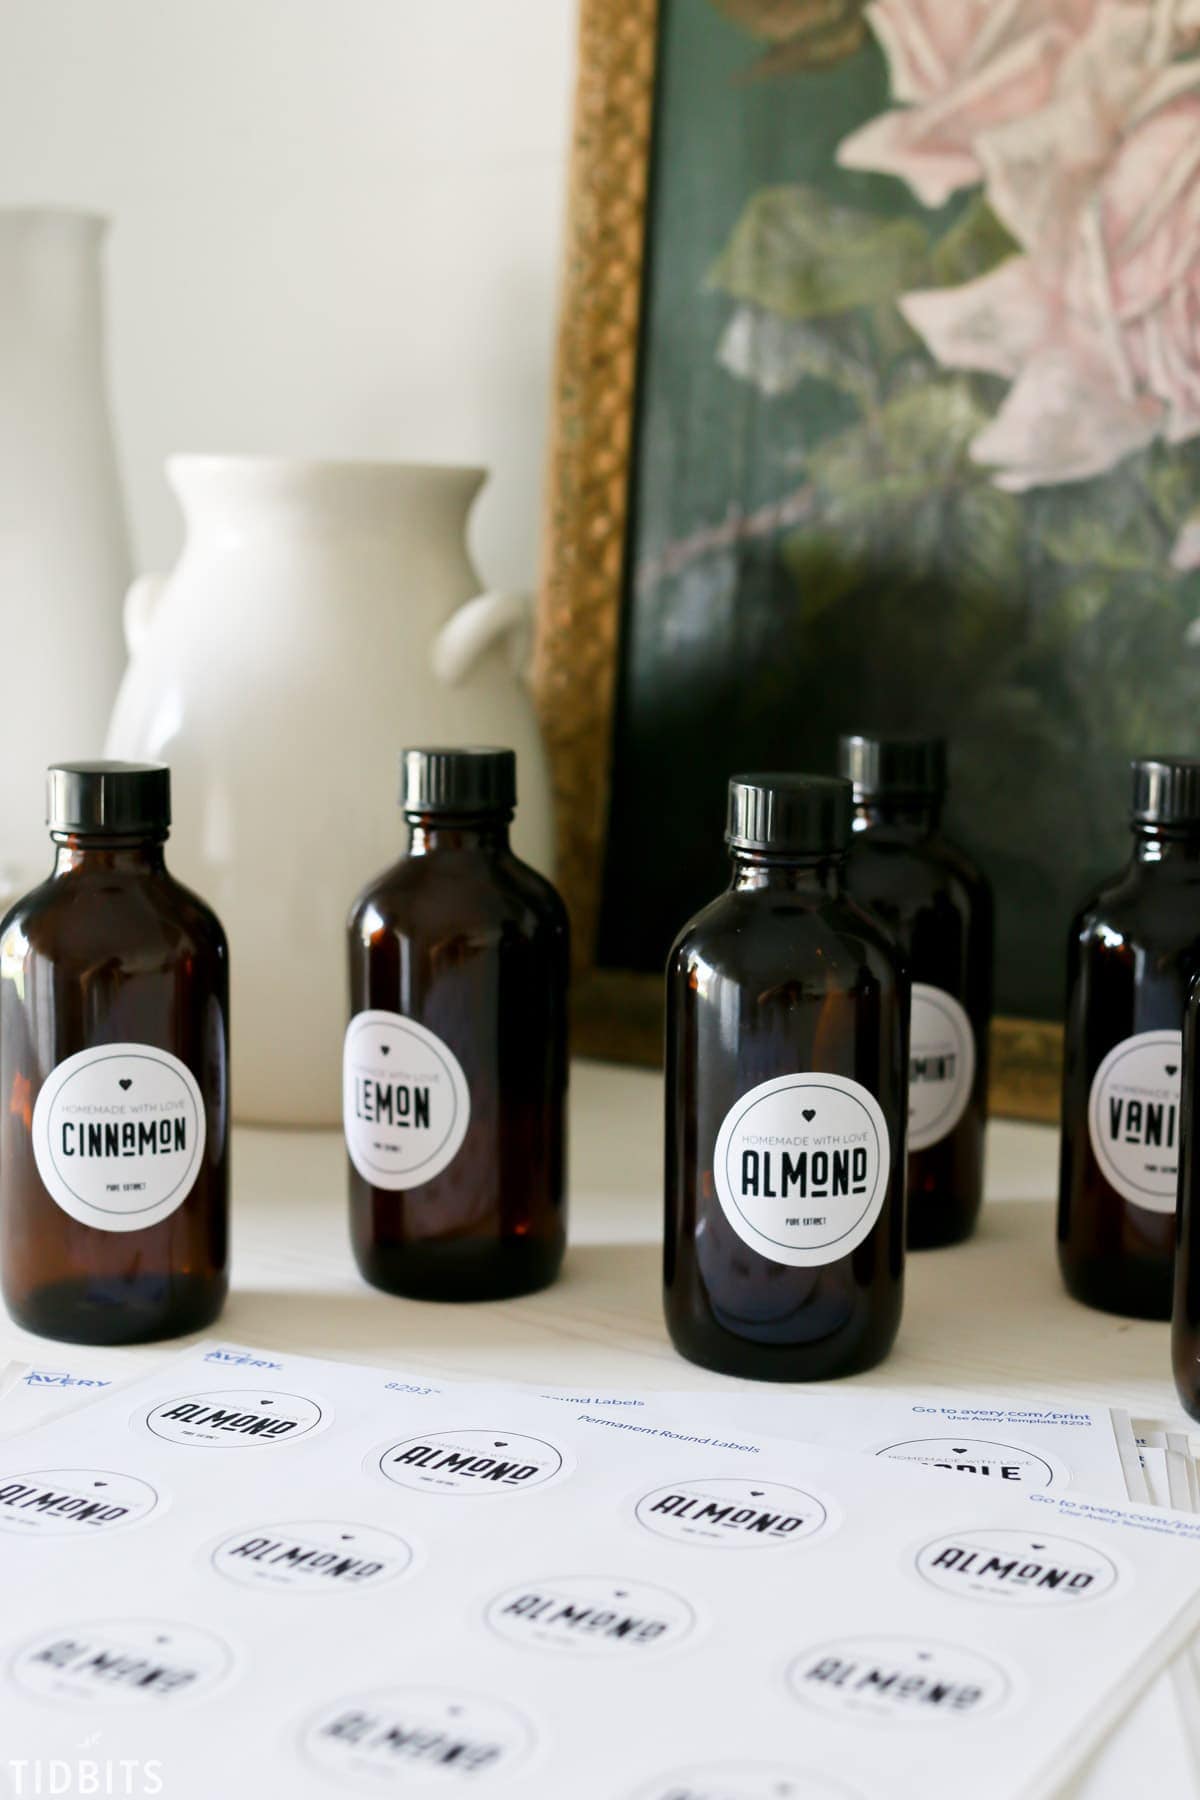 Free printable Vanilla Extract labels + 6 more extract flavors! Square or Circle available.